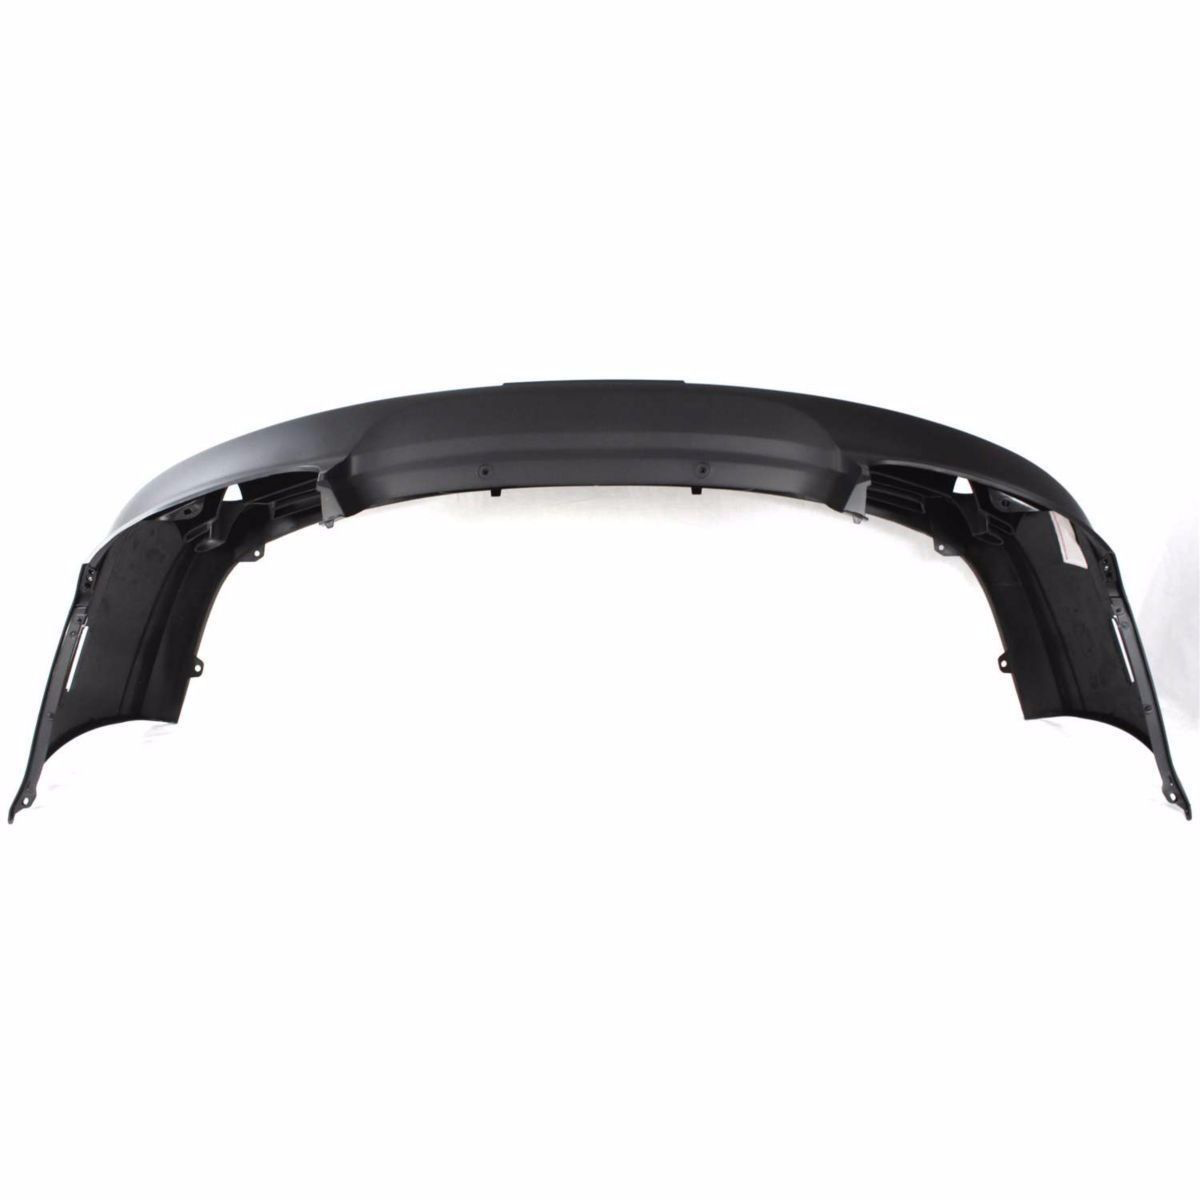 2002-2005 HYUNDAI SONATA Front Bumper Cover Painted to Match